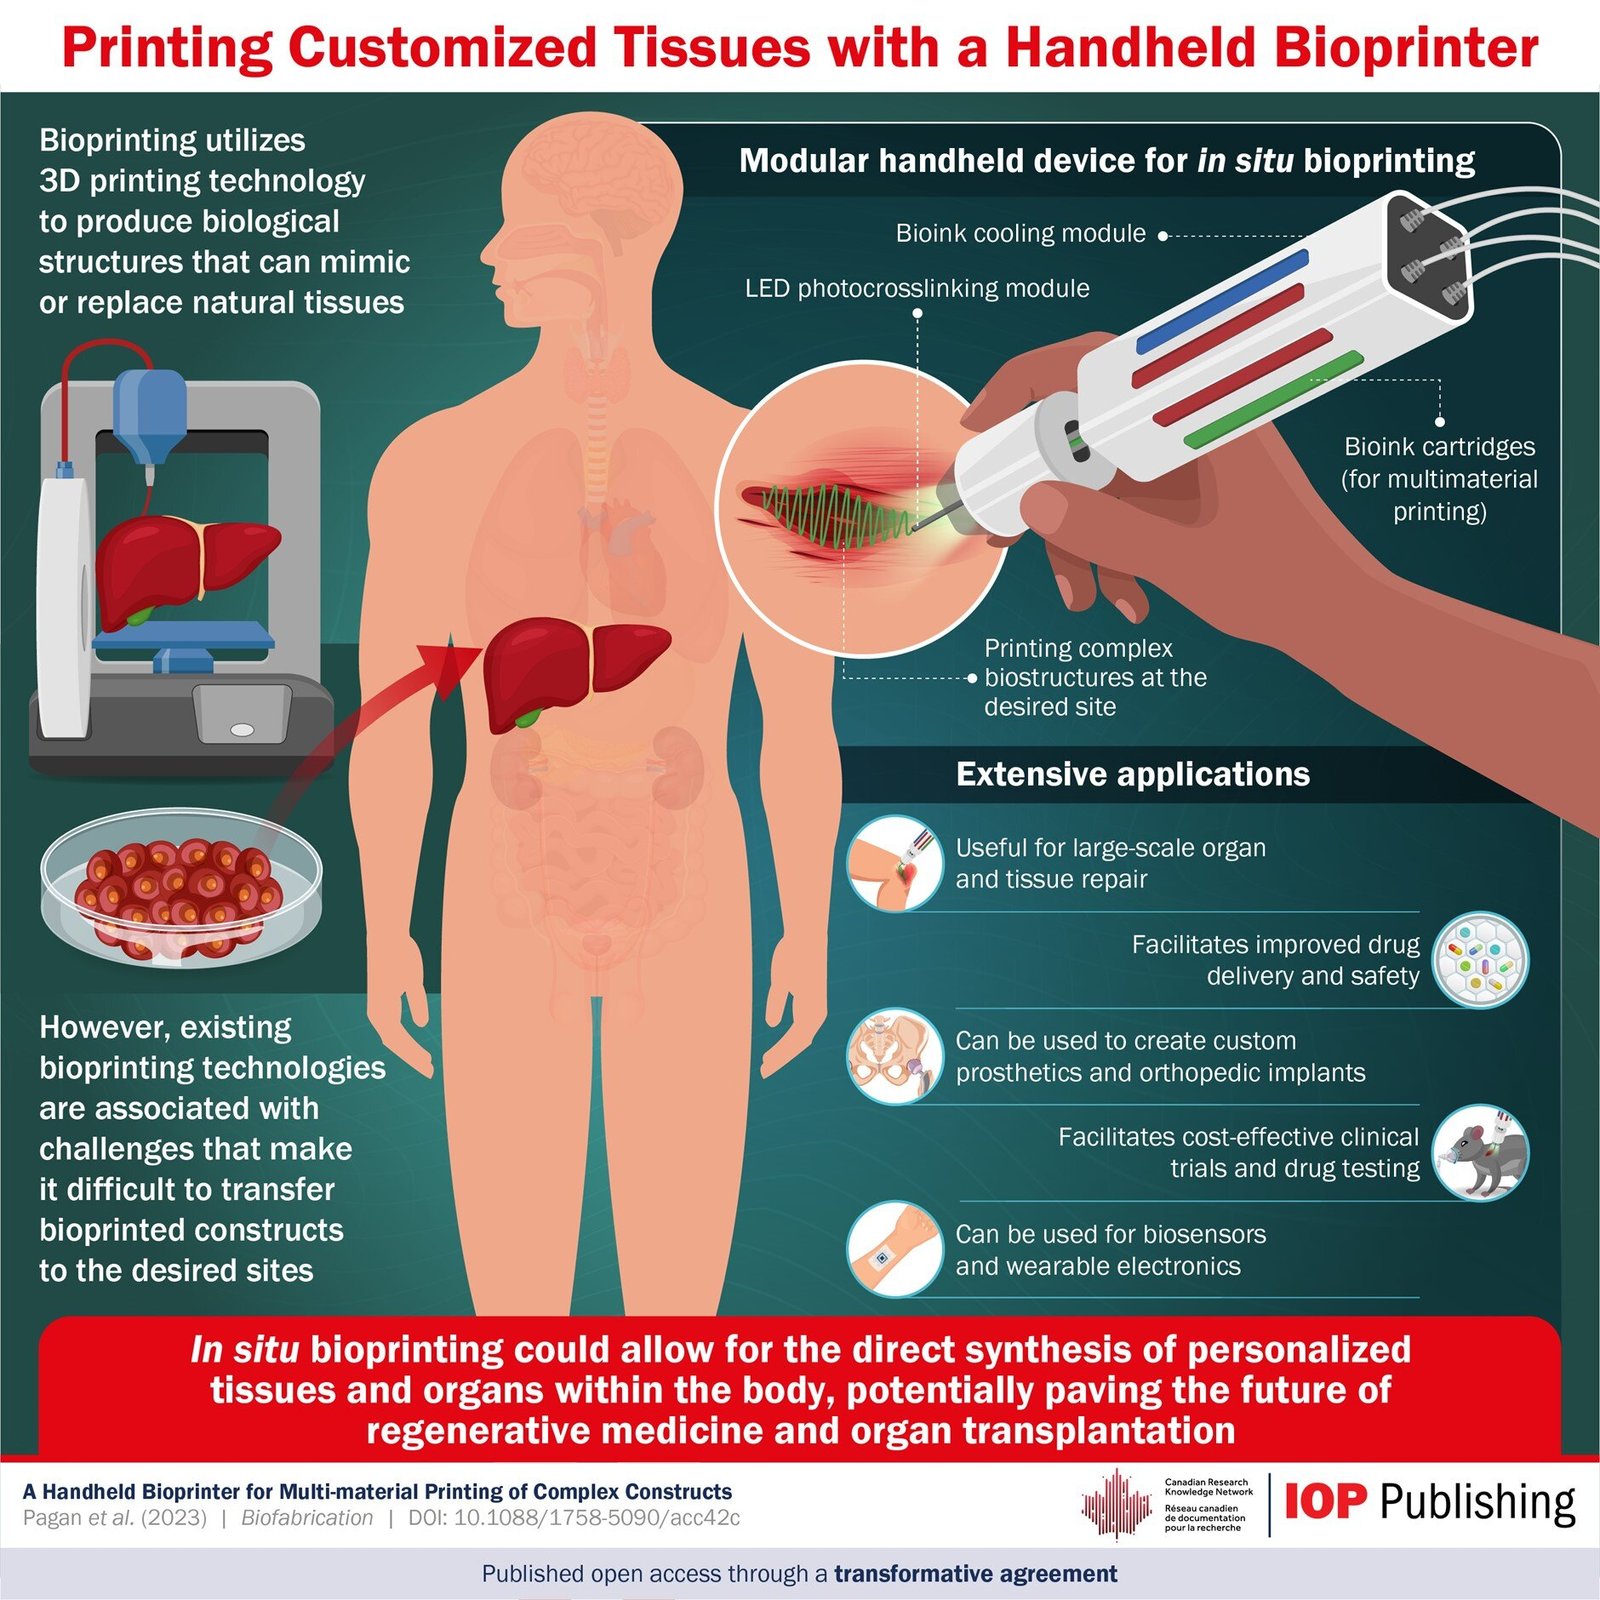 How do organ care technology and 3D bioprinting benefit transplant medicine?